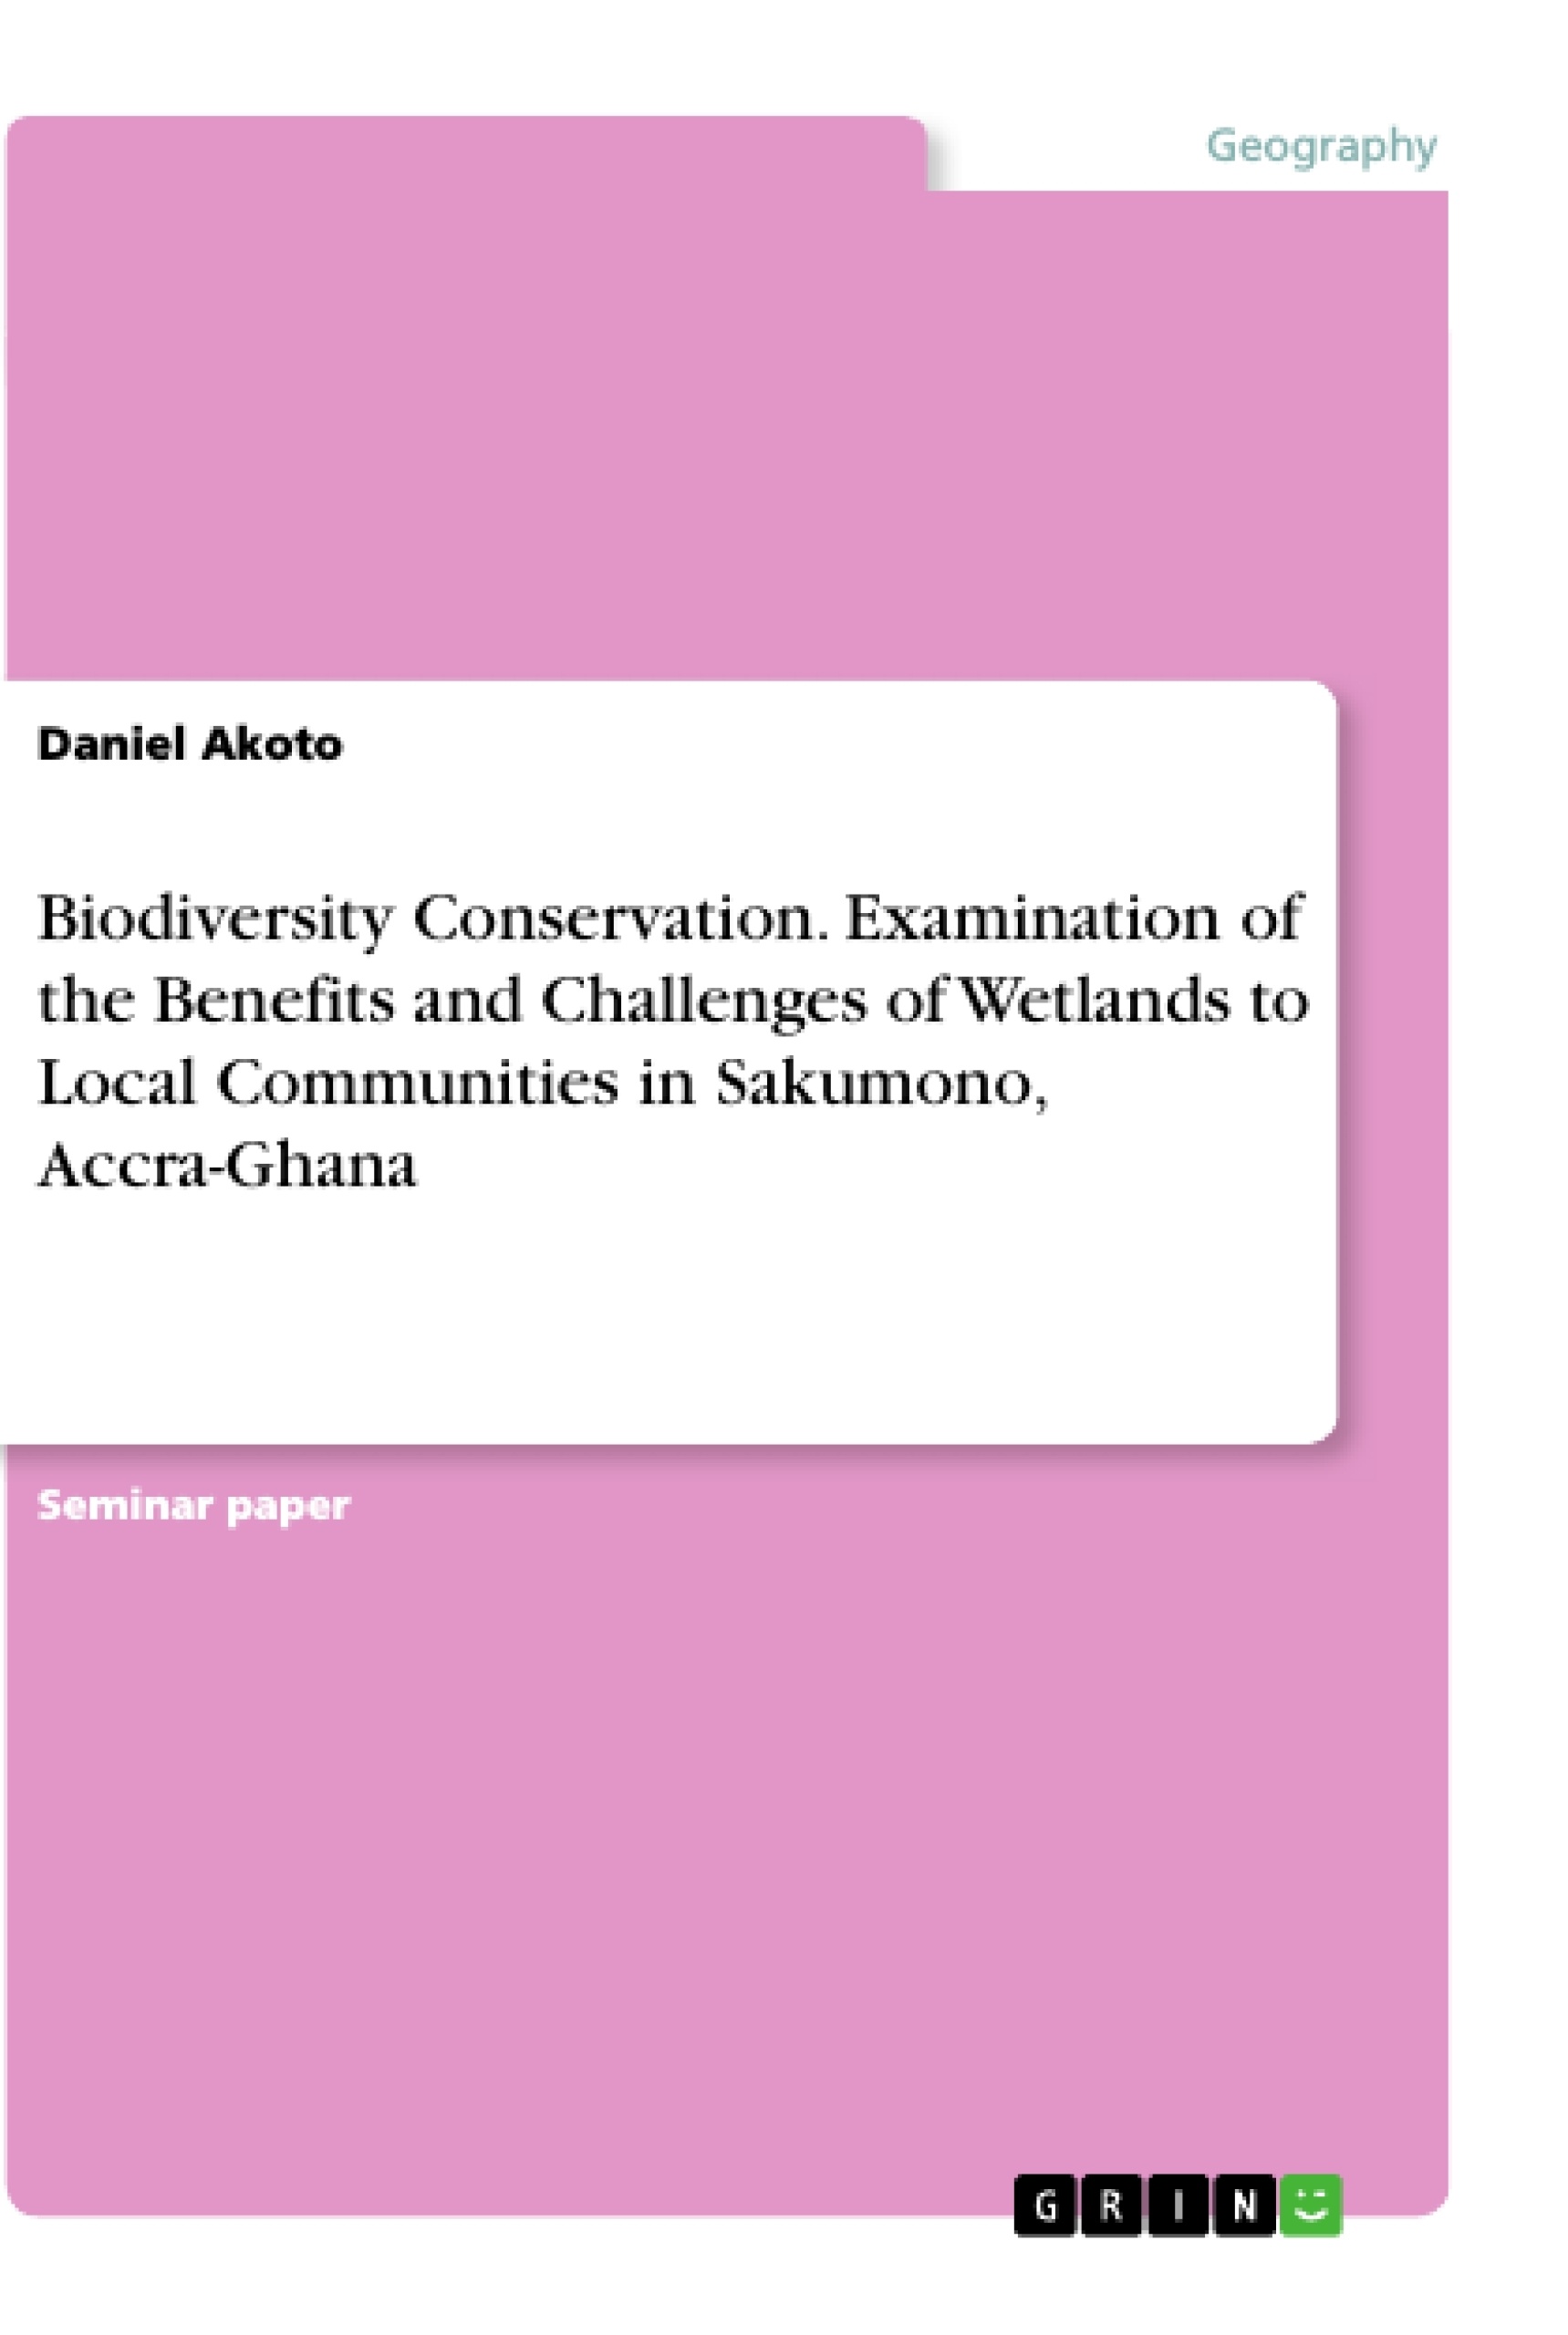 Title: Biodiversity Conservation. Examination of the Benefits and Challenges of Wetlands to Local Communities in Sakumono, Accra-Ghana